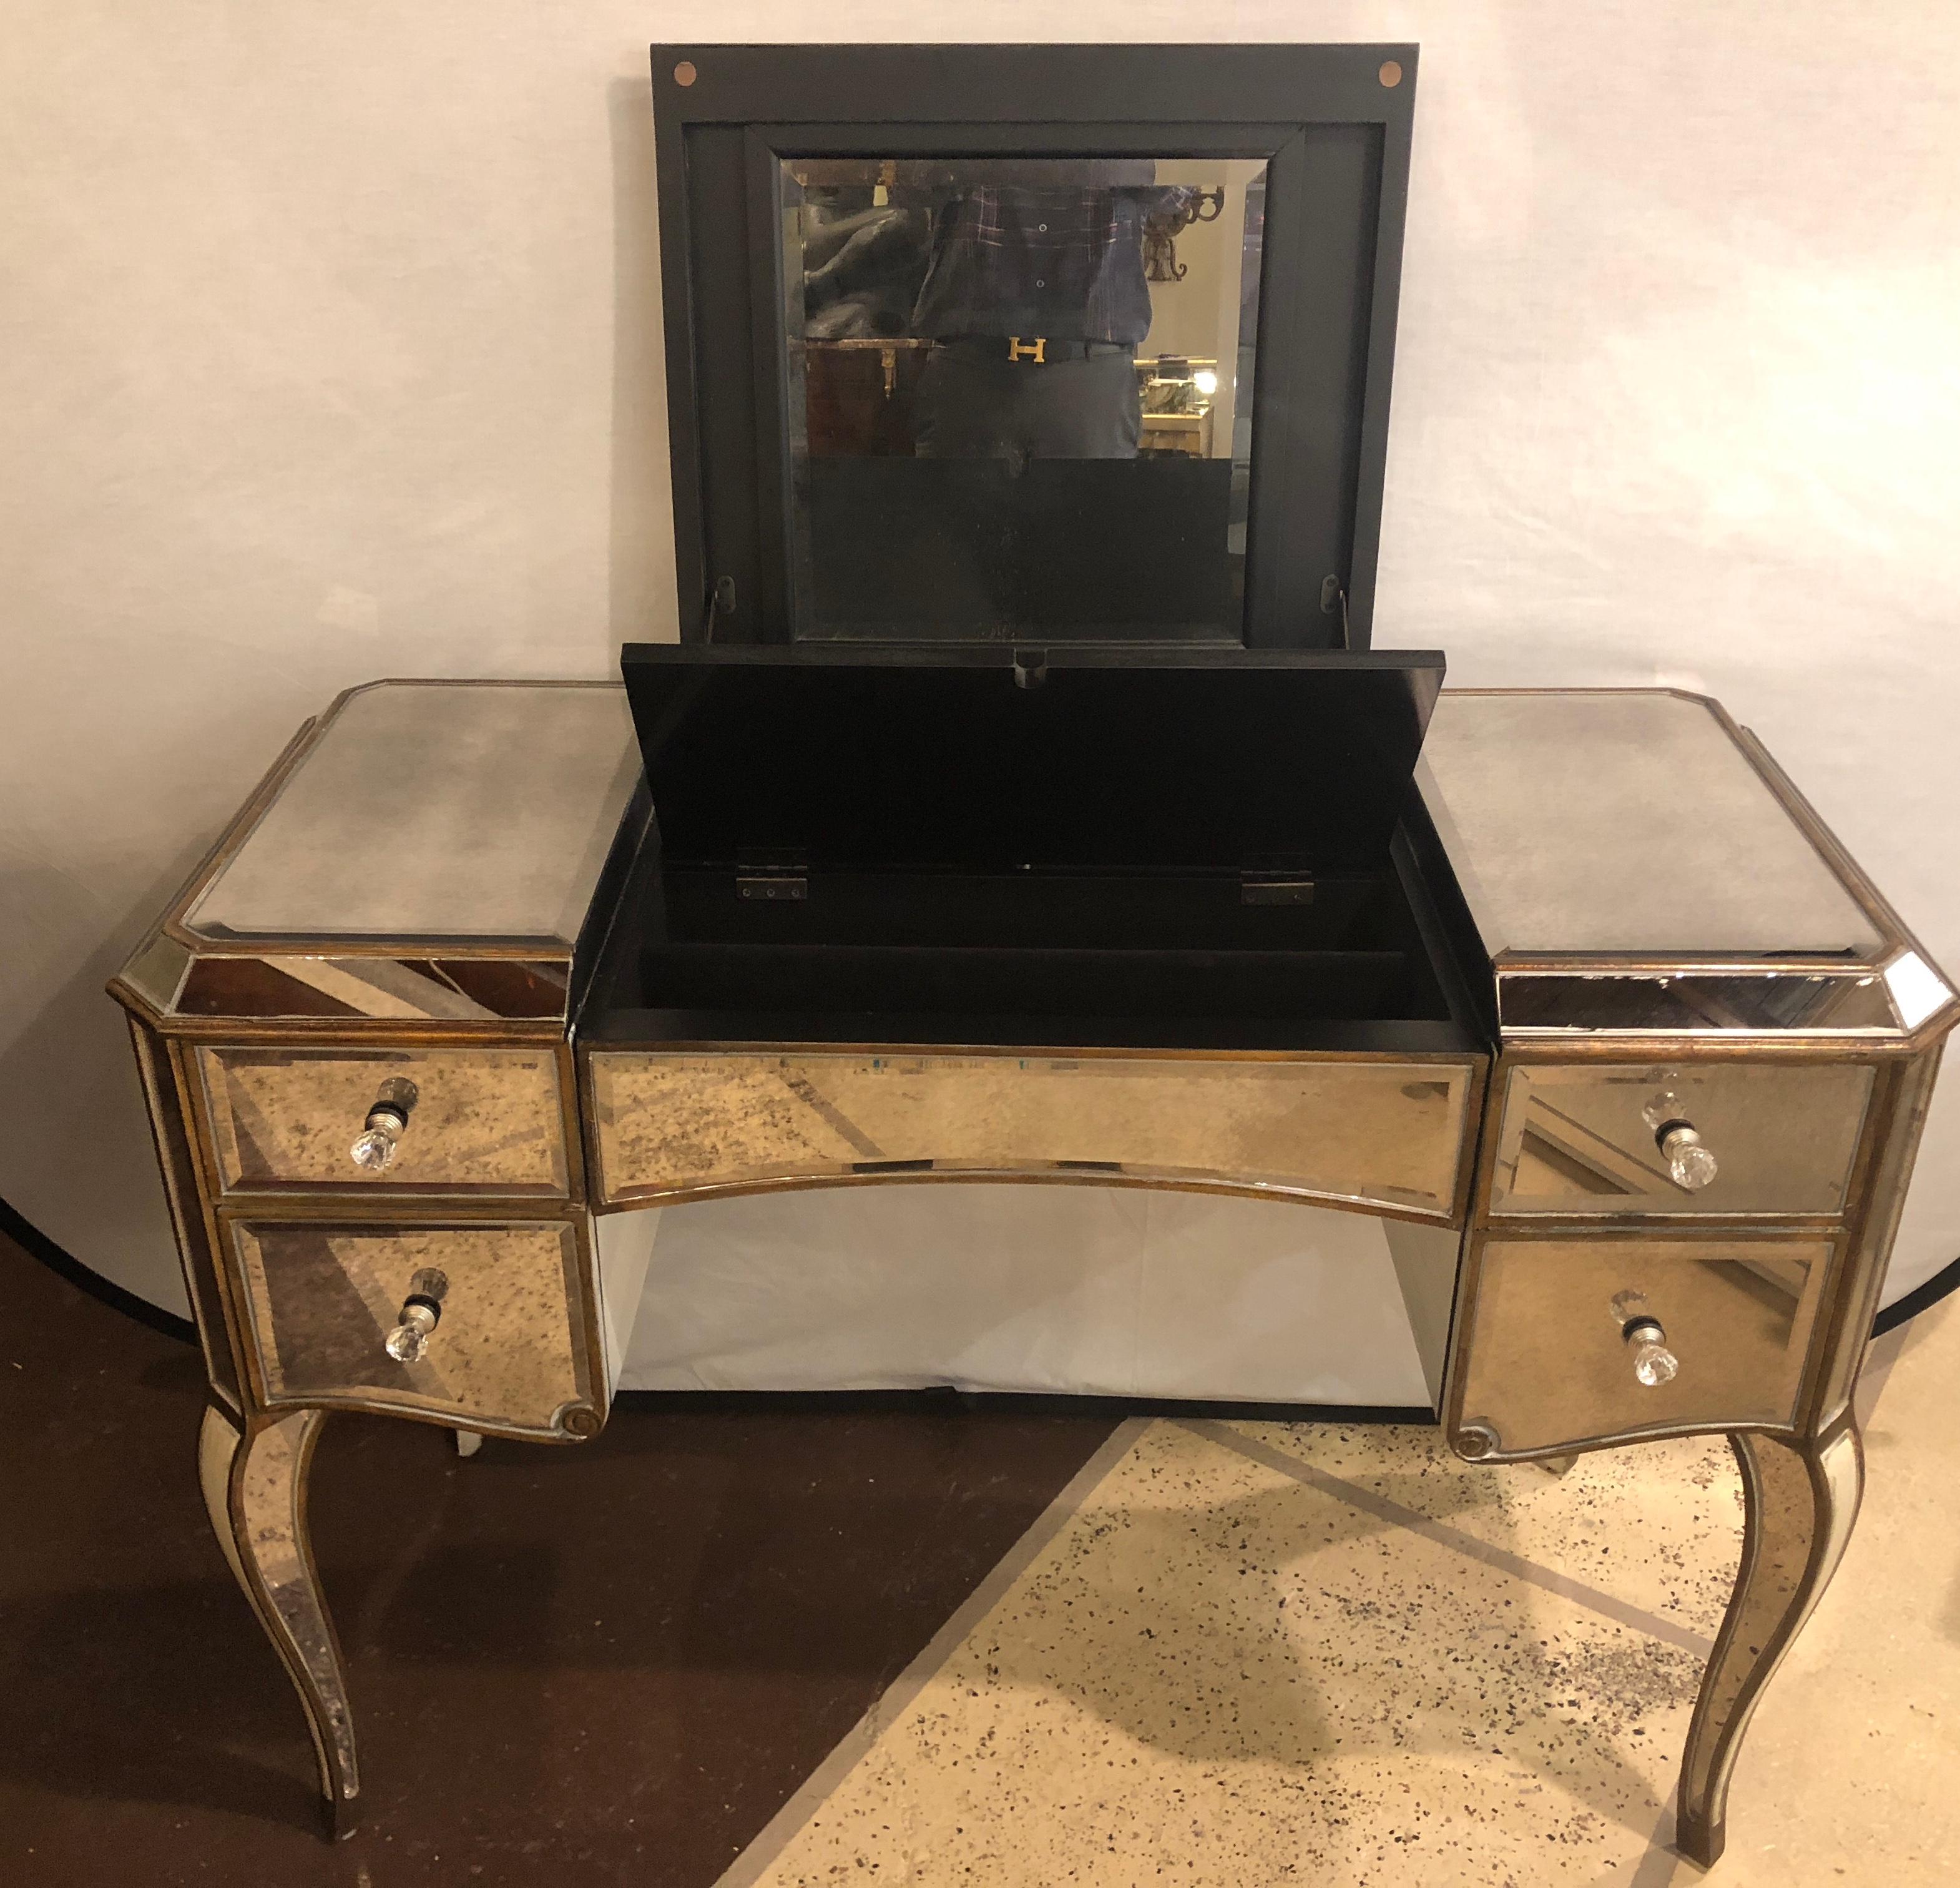 A fine mirrored curved gilt legged five draw vanity accentuated with crystal knobs. The sweeping mirrored legs finely framed in a wooden gilt gold design. The centre flip top drawer having hide away interior compartment, flanked by a group of four